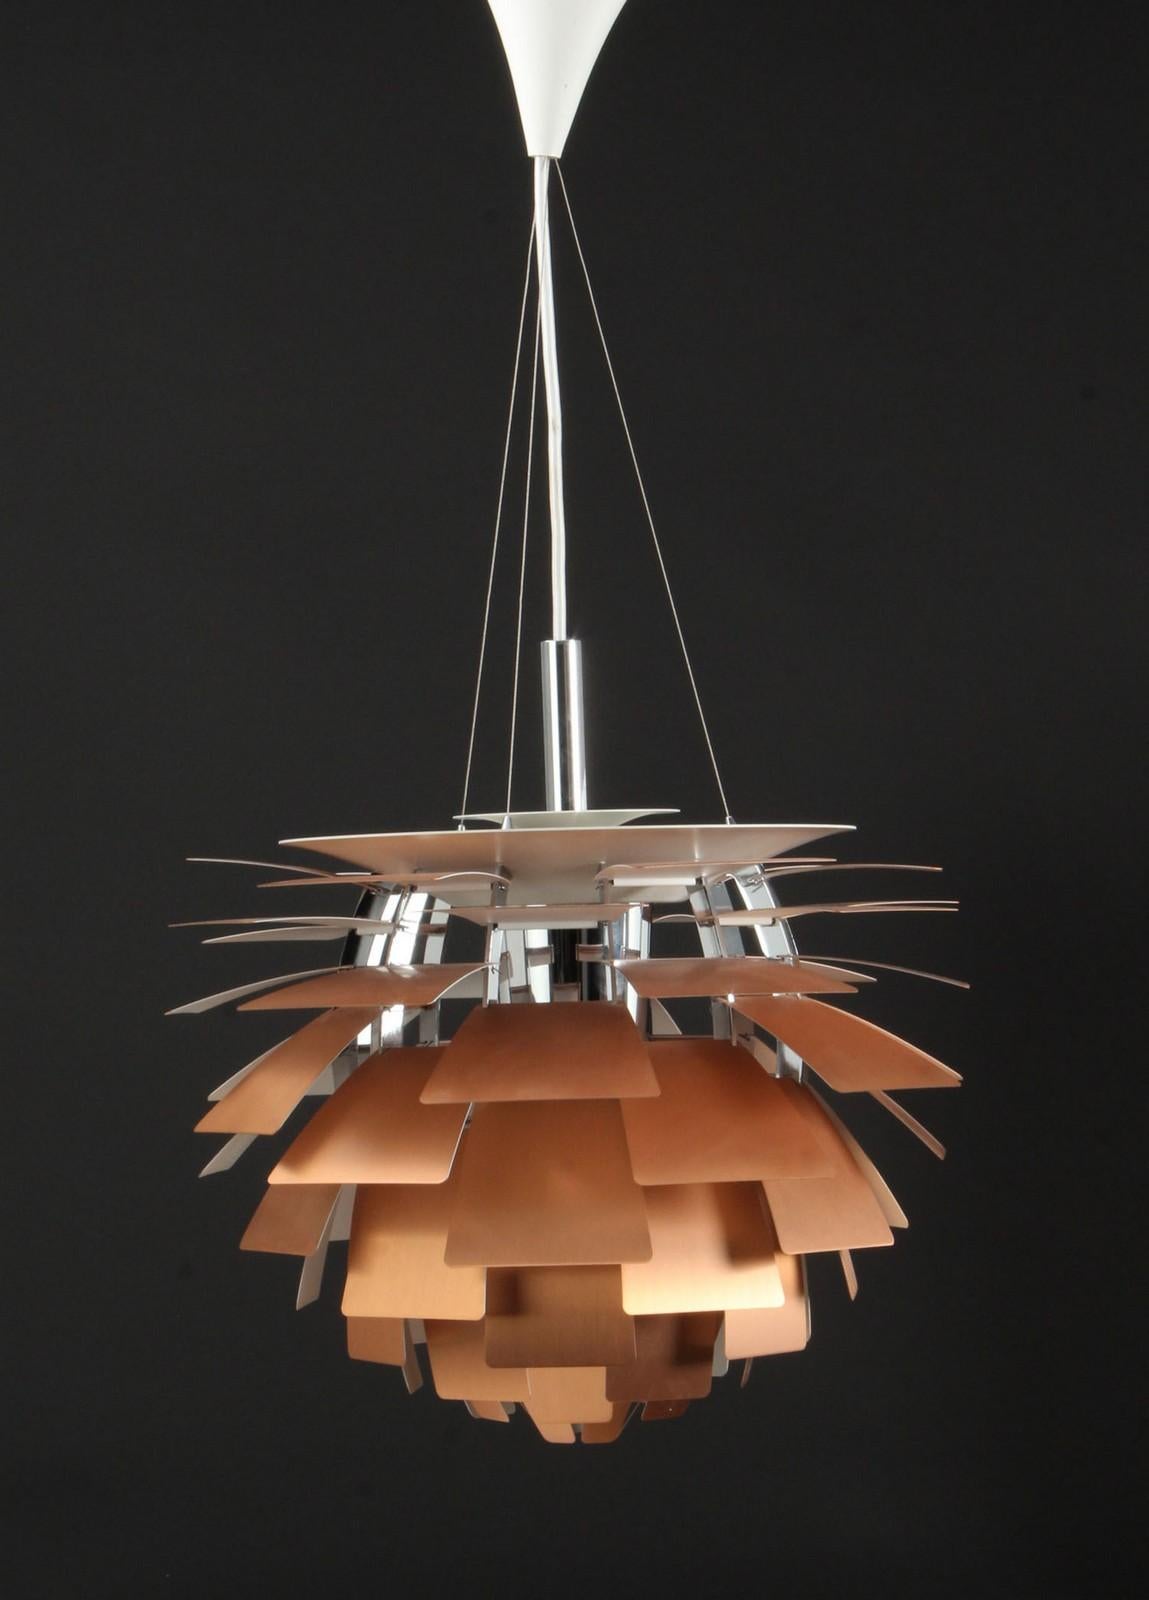 PH artichoke pendant lamp designed by Poul Henningsen for Louis Poulsen, 1950s.
Artichoke', with 72 copper blades placed on 12 chromed steel arcs. Complete with socket cover in chromed aluminum, suspension wire, white fabric cable, and canopy.